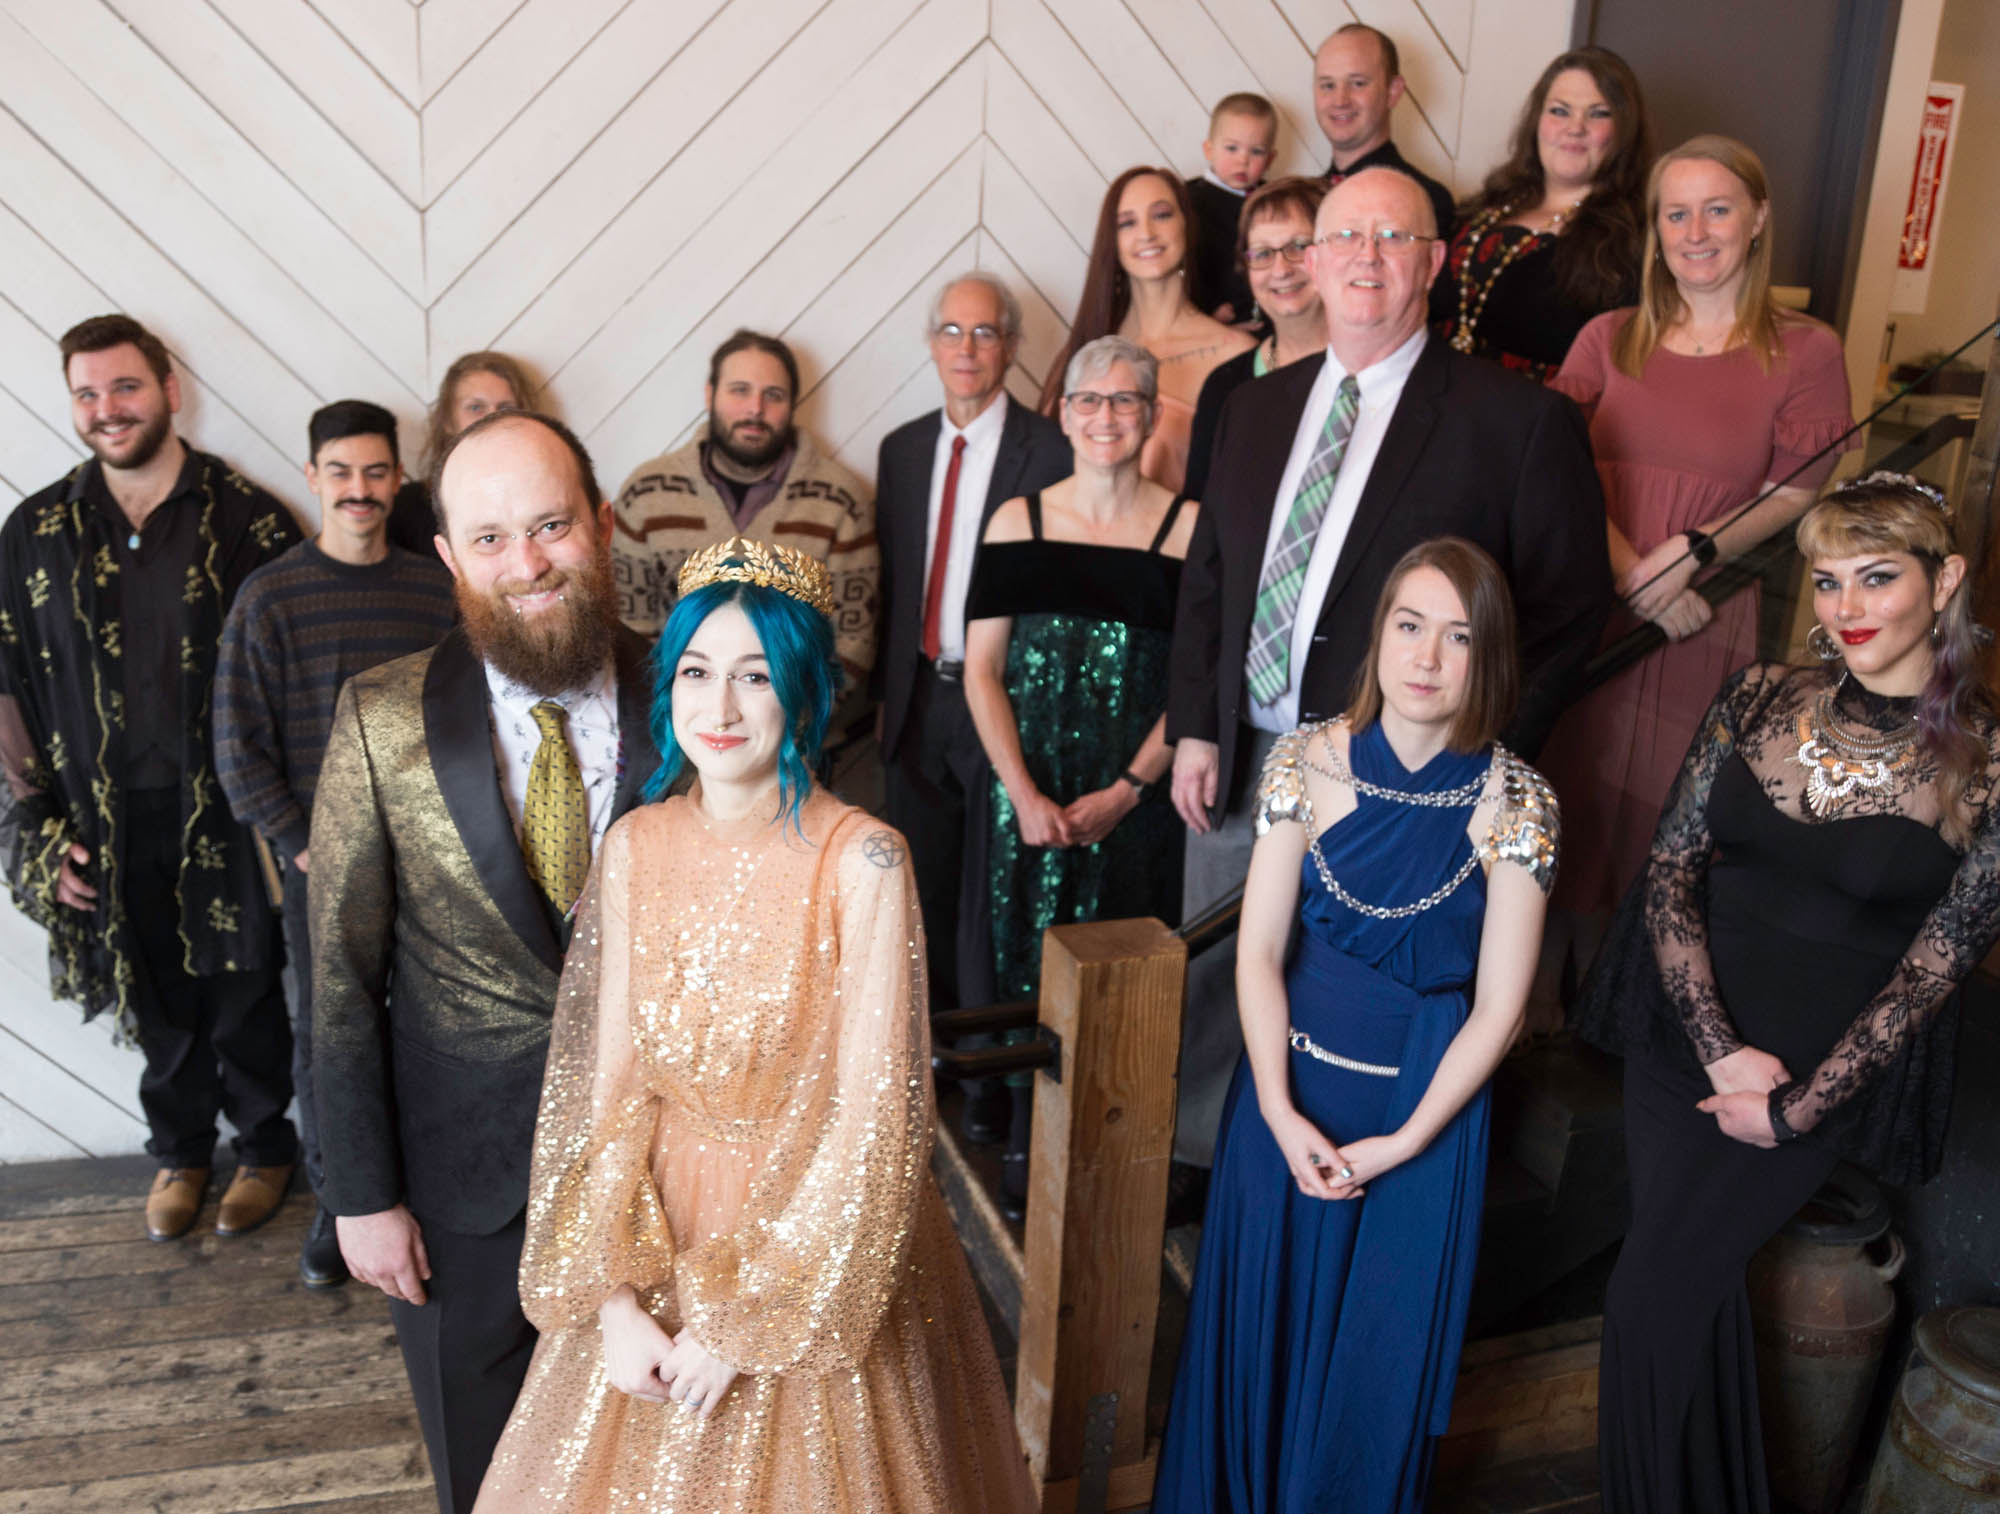 Couple with Piercings and Blue Hair and Wedding Party at Union Pine PDX